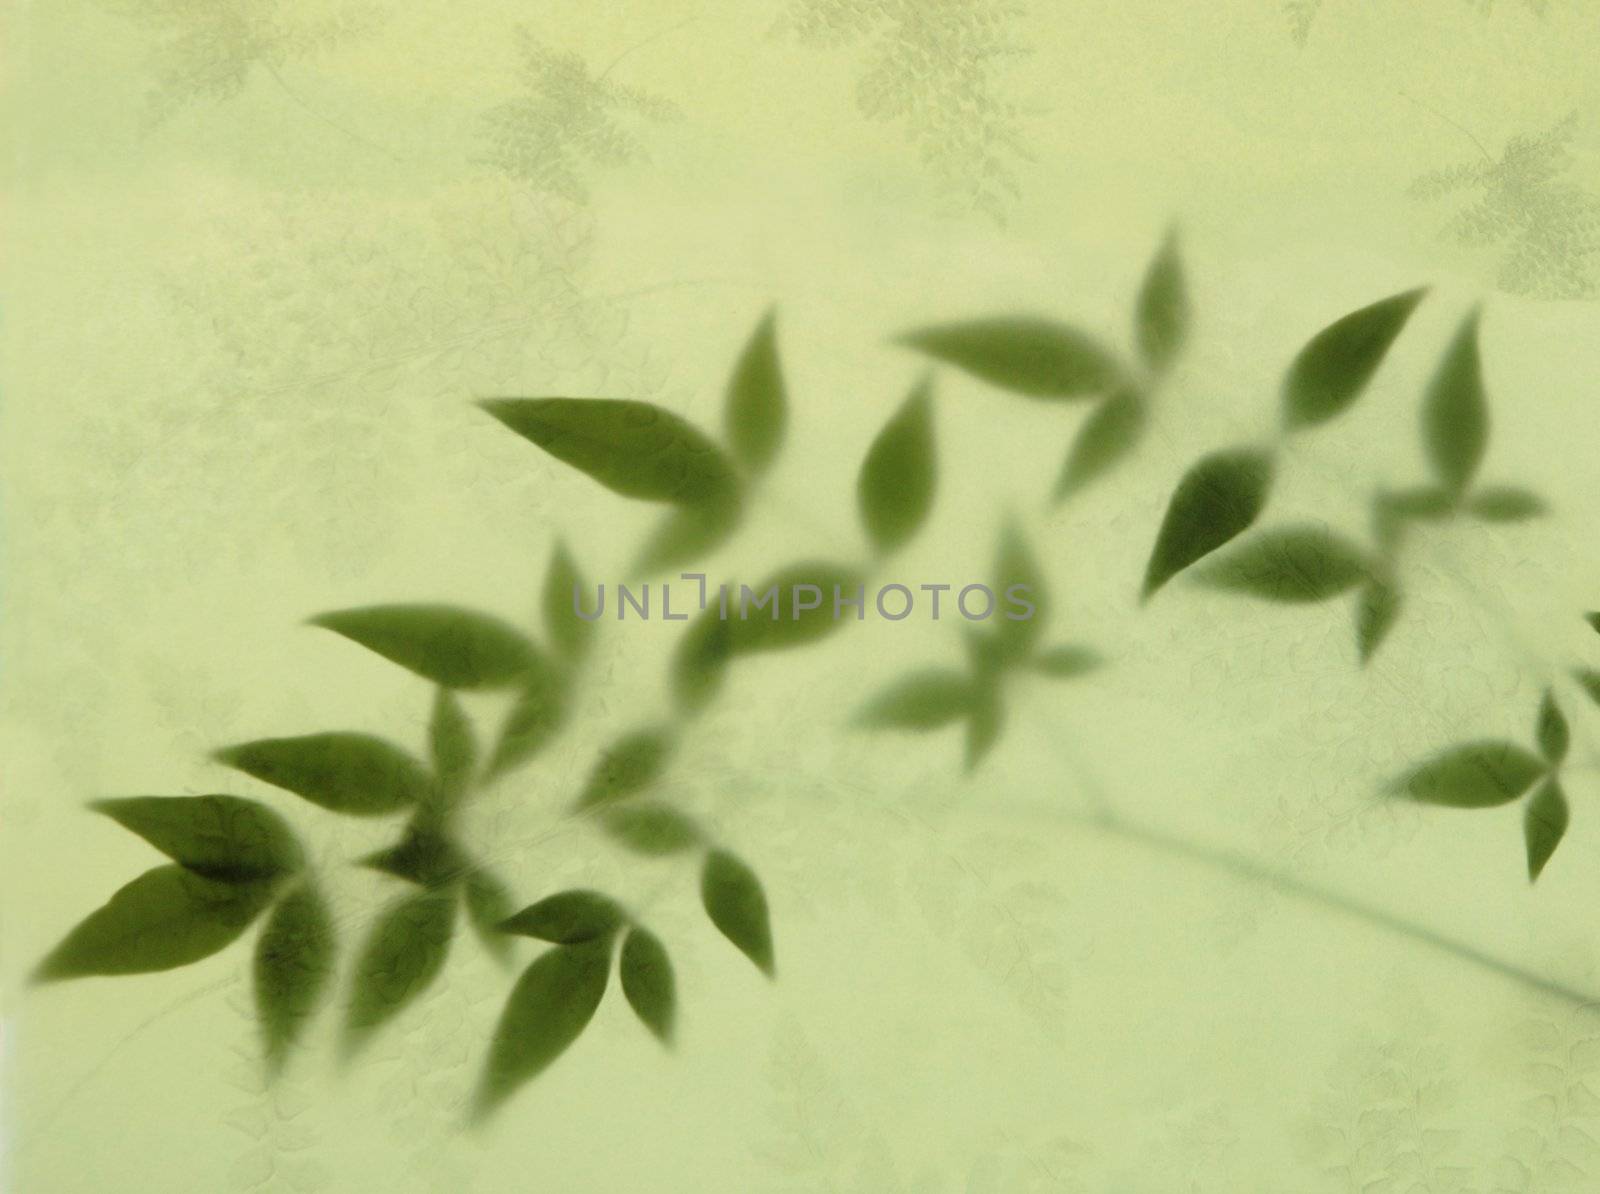 nandina (heavenly bamboo) leaves partially obscured by textured paper imprinted with a fern motif